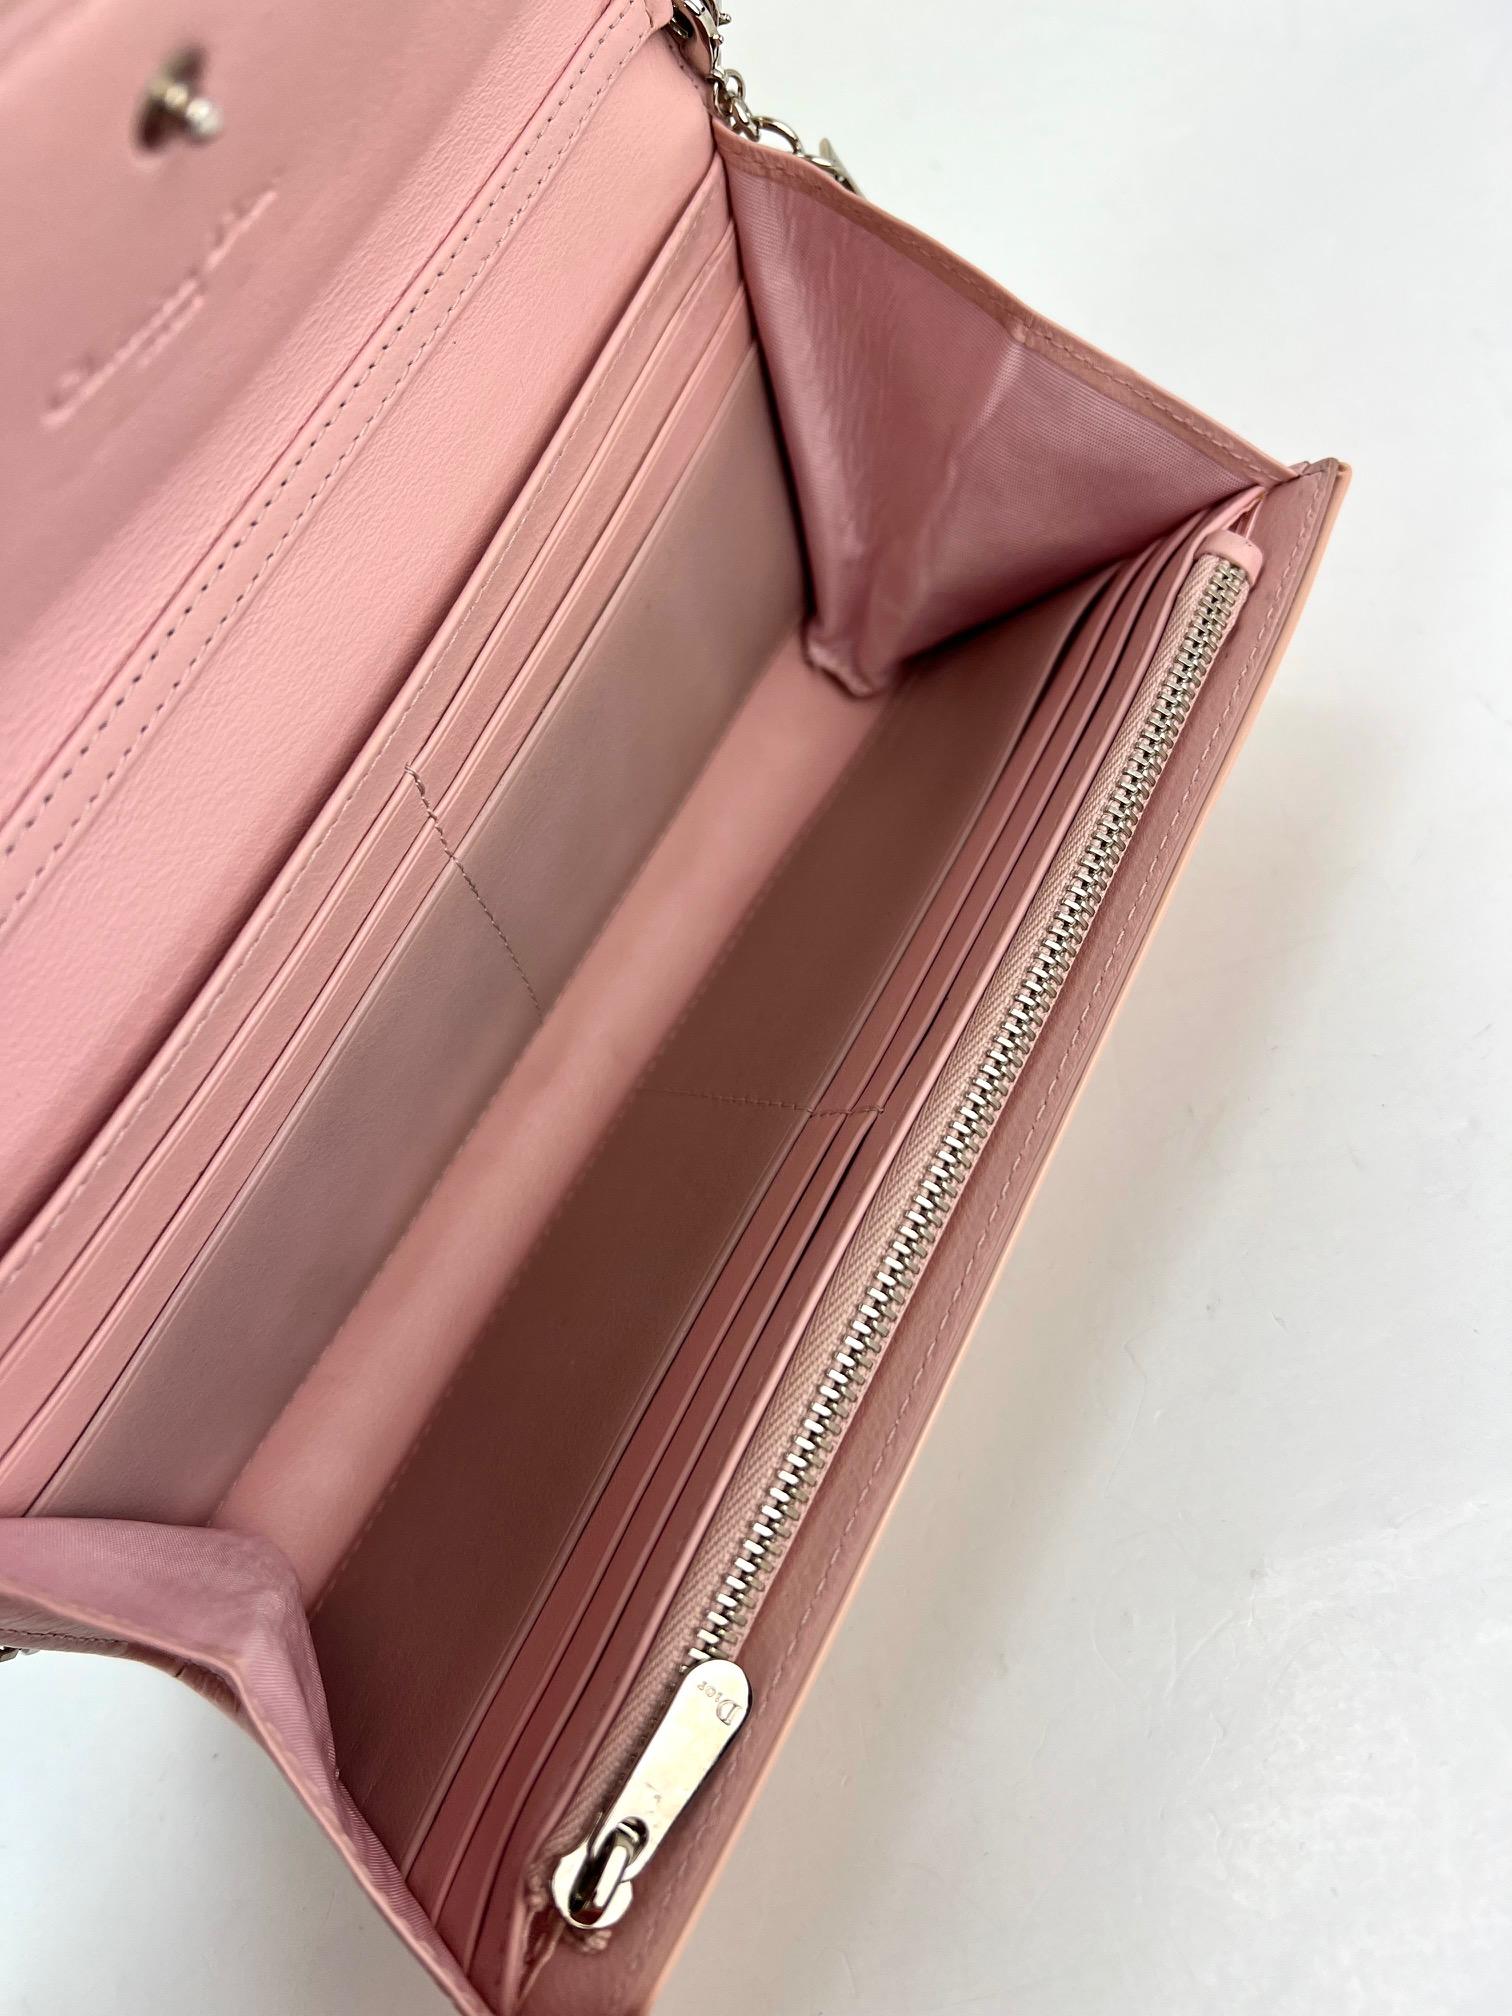 Lady Dior Pouch Pink Patent Leather Cannage Wallet on a Chain Clutch  6